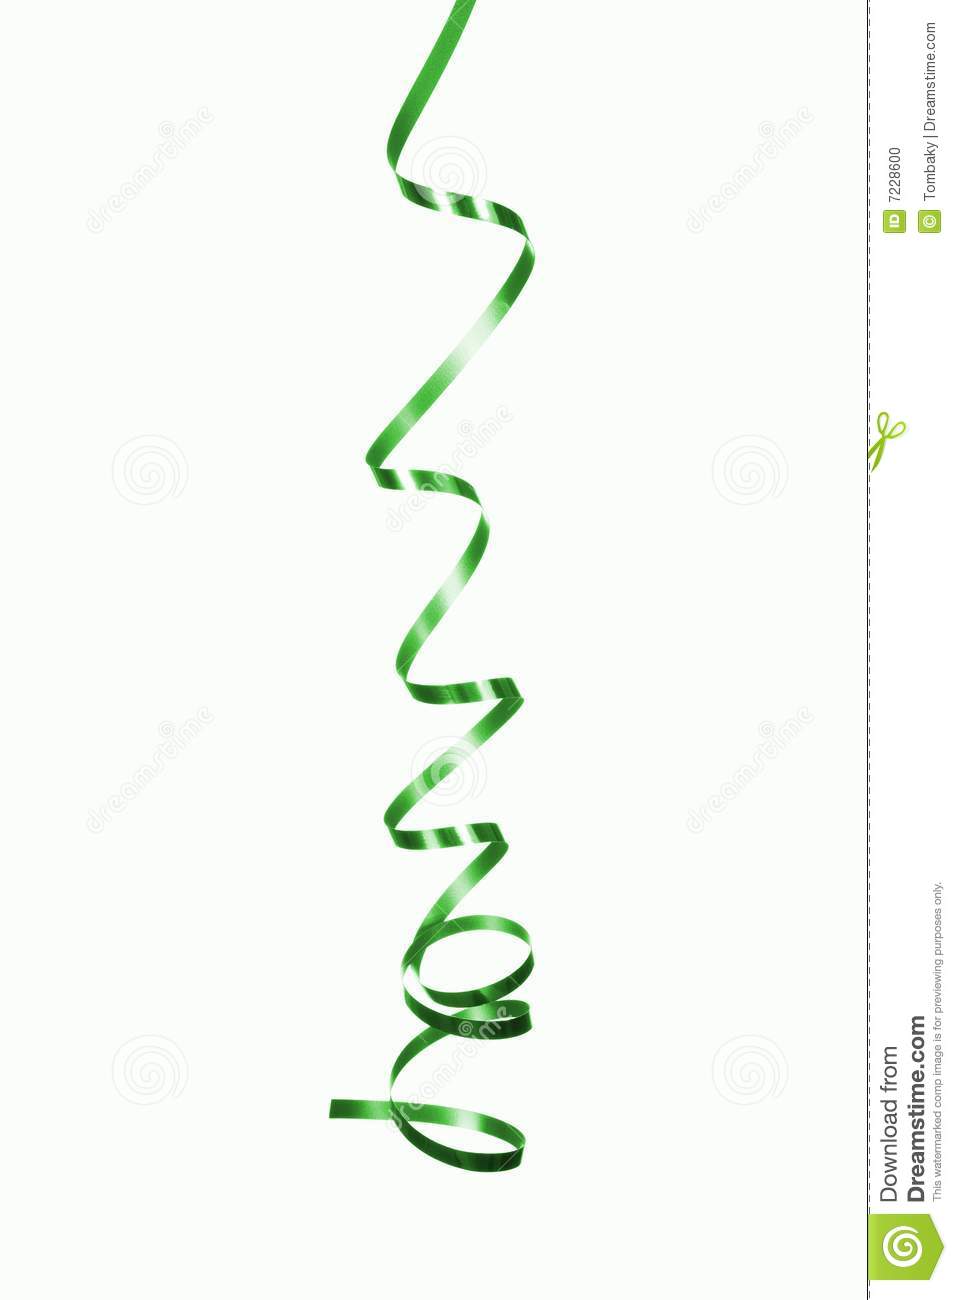 One Curly Green Ribbon Stock Photo   Image  7228600